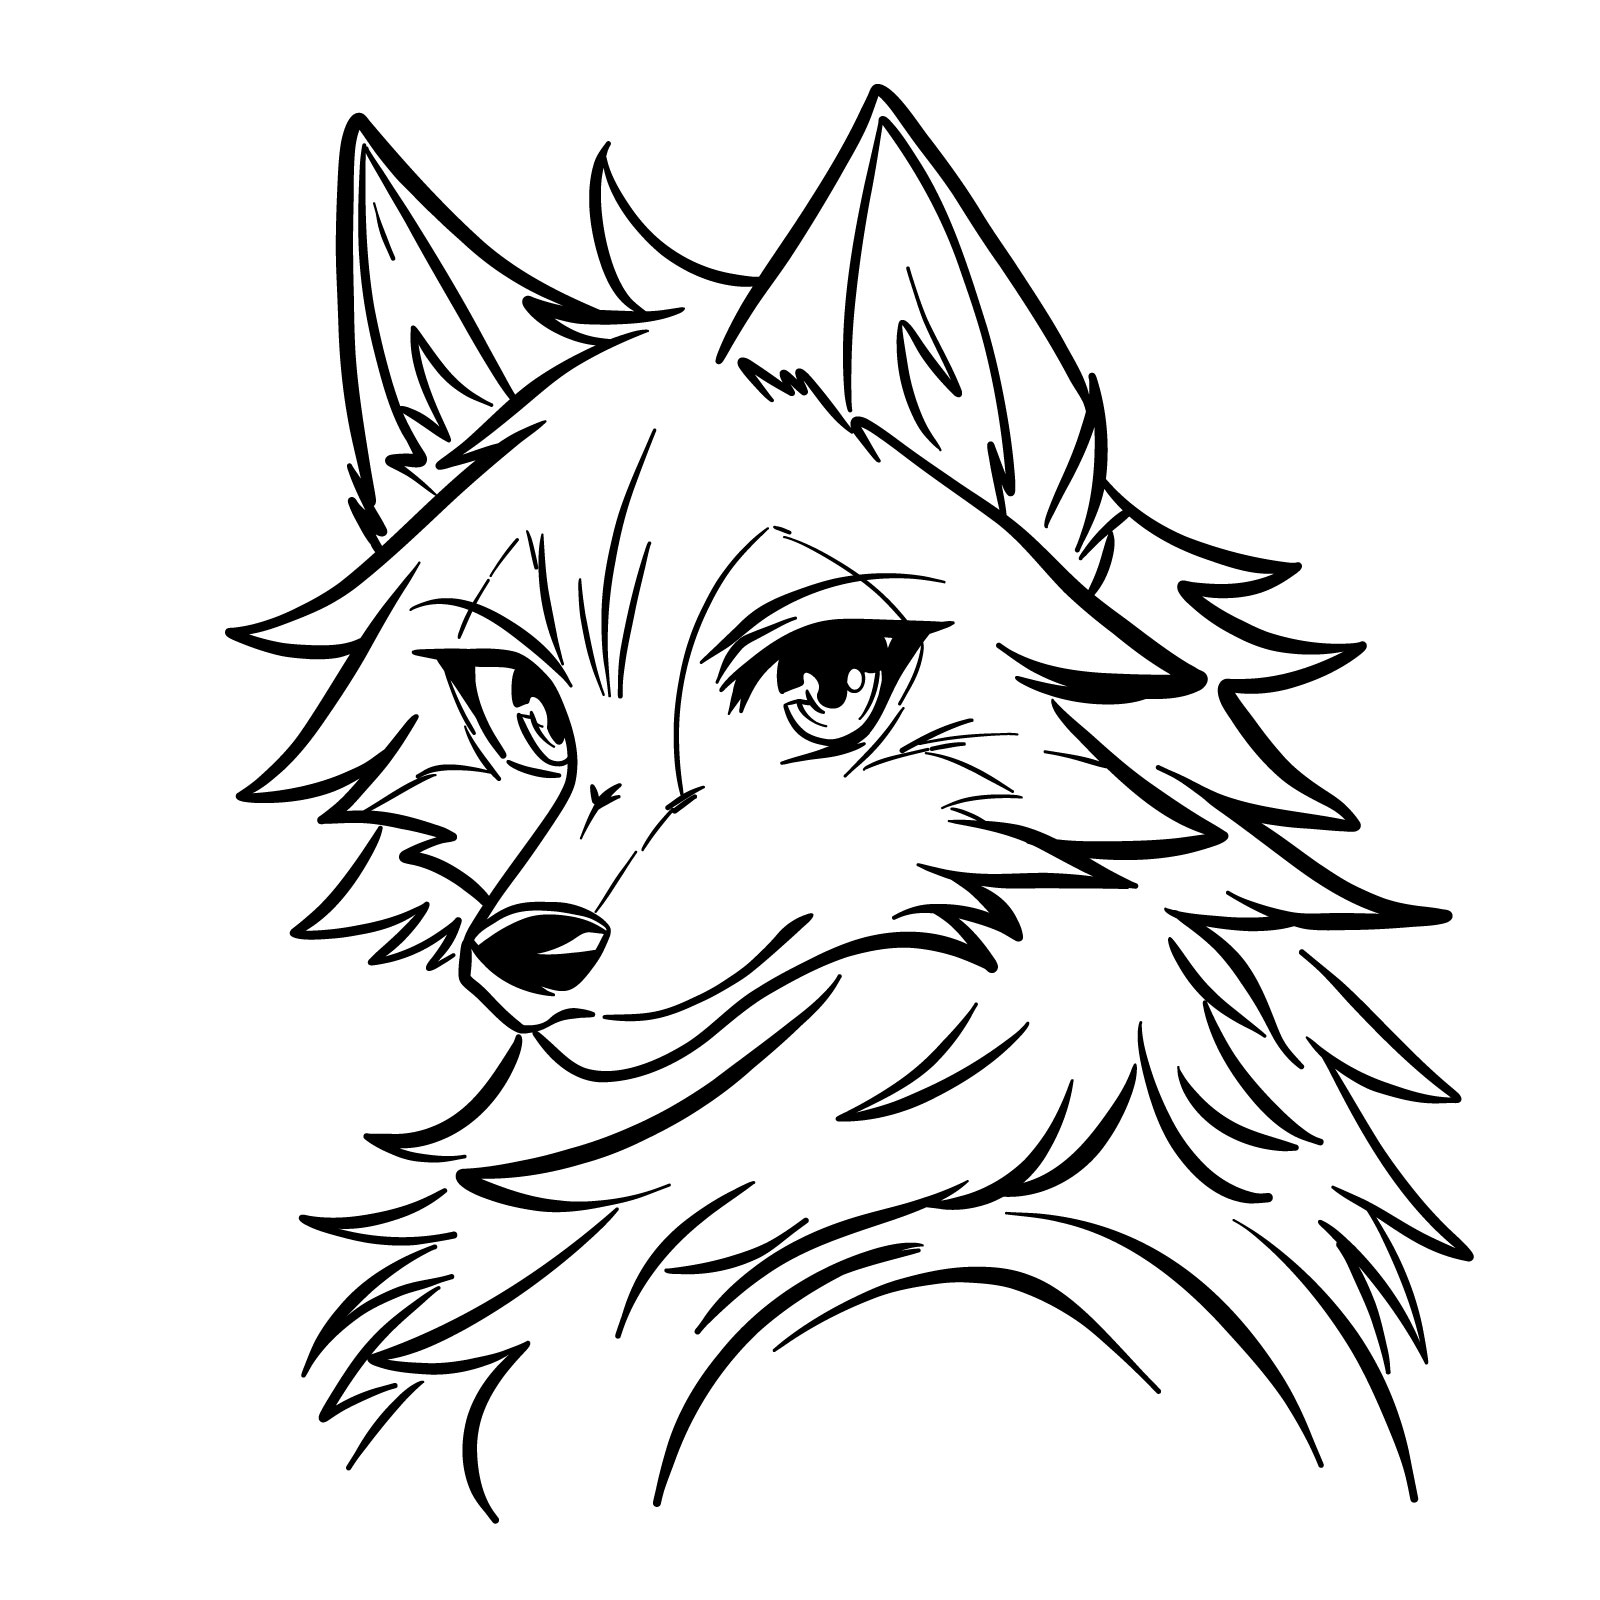 How to draw anime wolf's face - easy step-by-step drawing guide